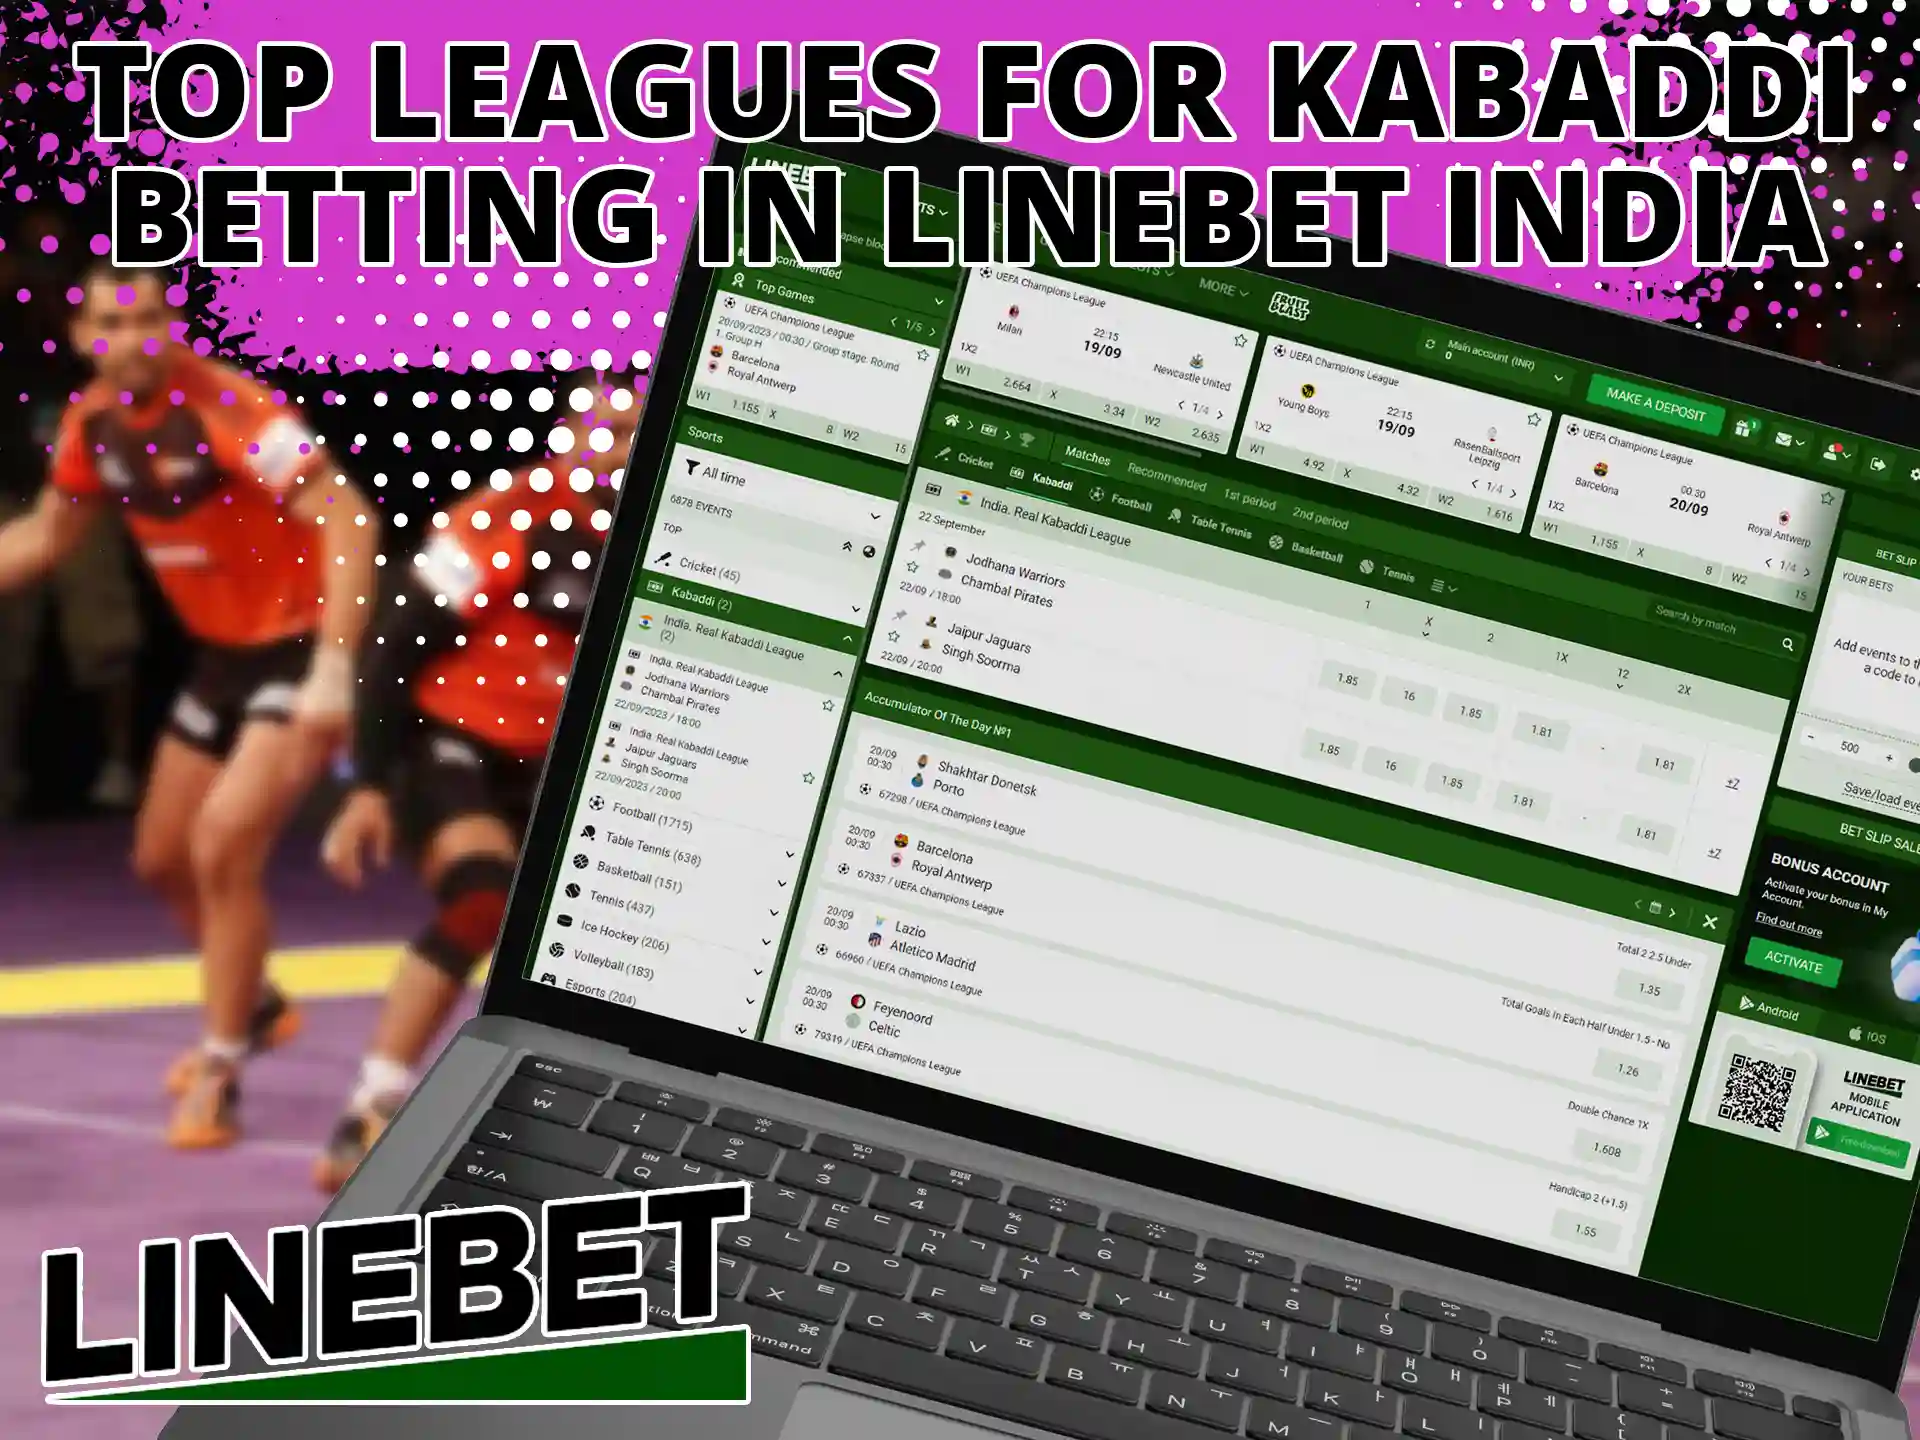 The Linebet website features various kabaddi events that are updated daily.